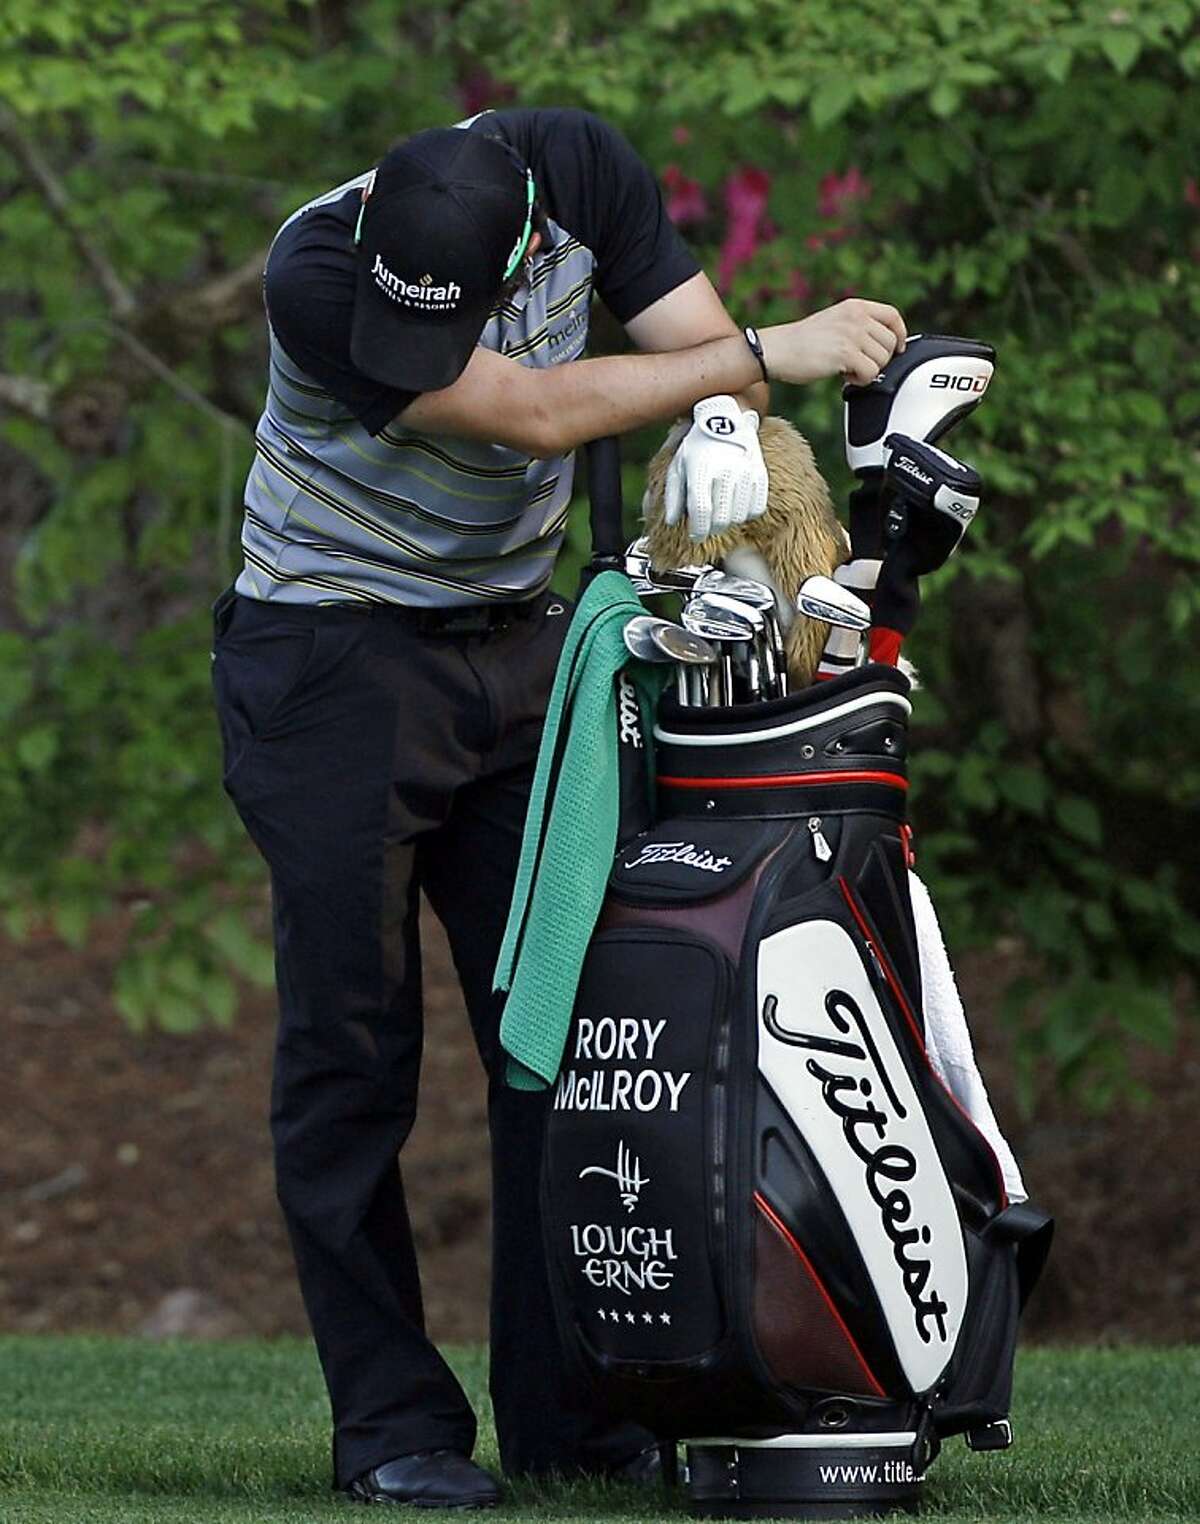 ADVANCE FOR WEEKEND EDITIONS, MARCH 31-APRIL 1 - FILE - In this April 10, 2011, file photo, Rory McIlroy of Northern Ireland, leans on his golf bag on the 13th hole during the final round of the Masters golf tournament in Augusta, Ga. McIlroy started the final round with a four-shot lead and shot 80. (AP Photo/Matt Slocum, File)